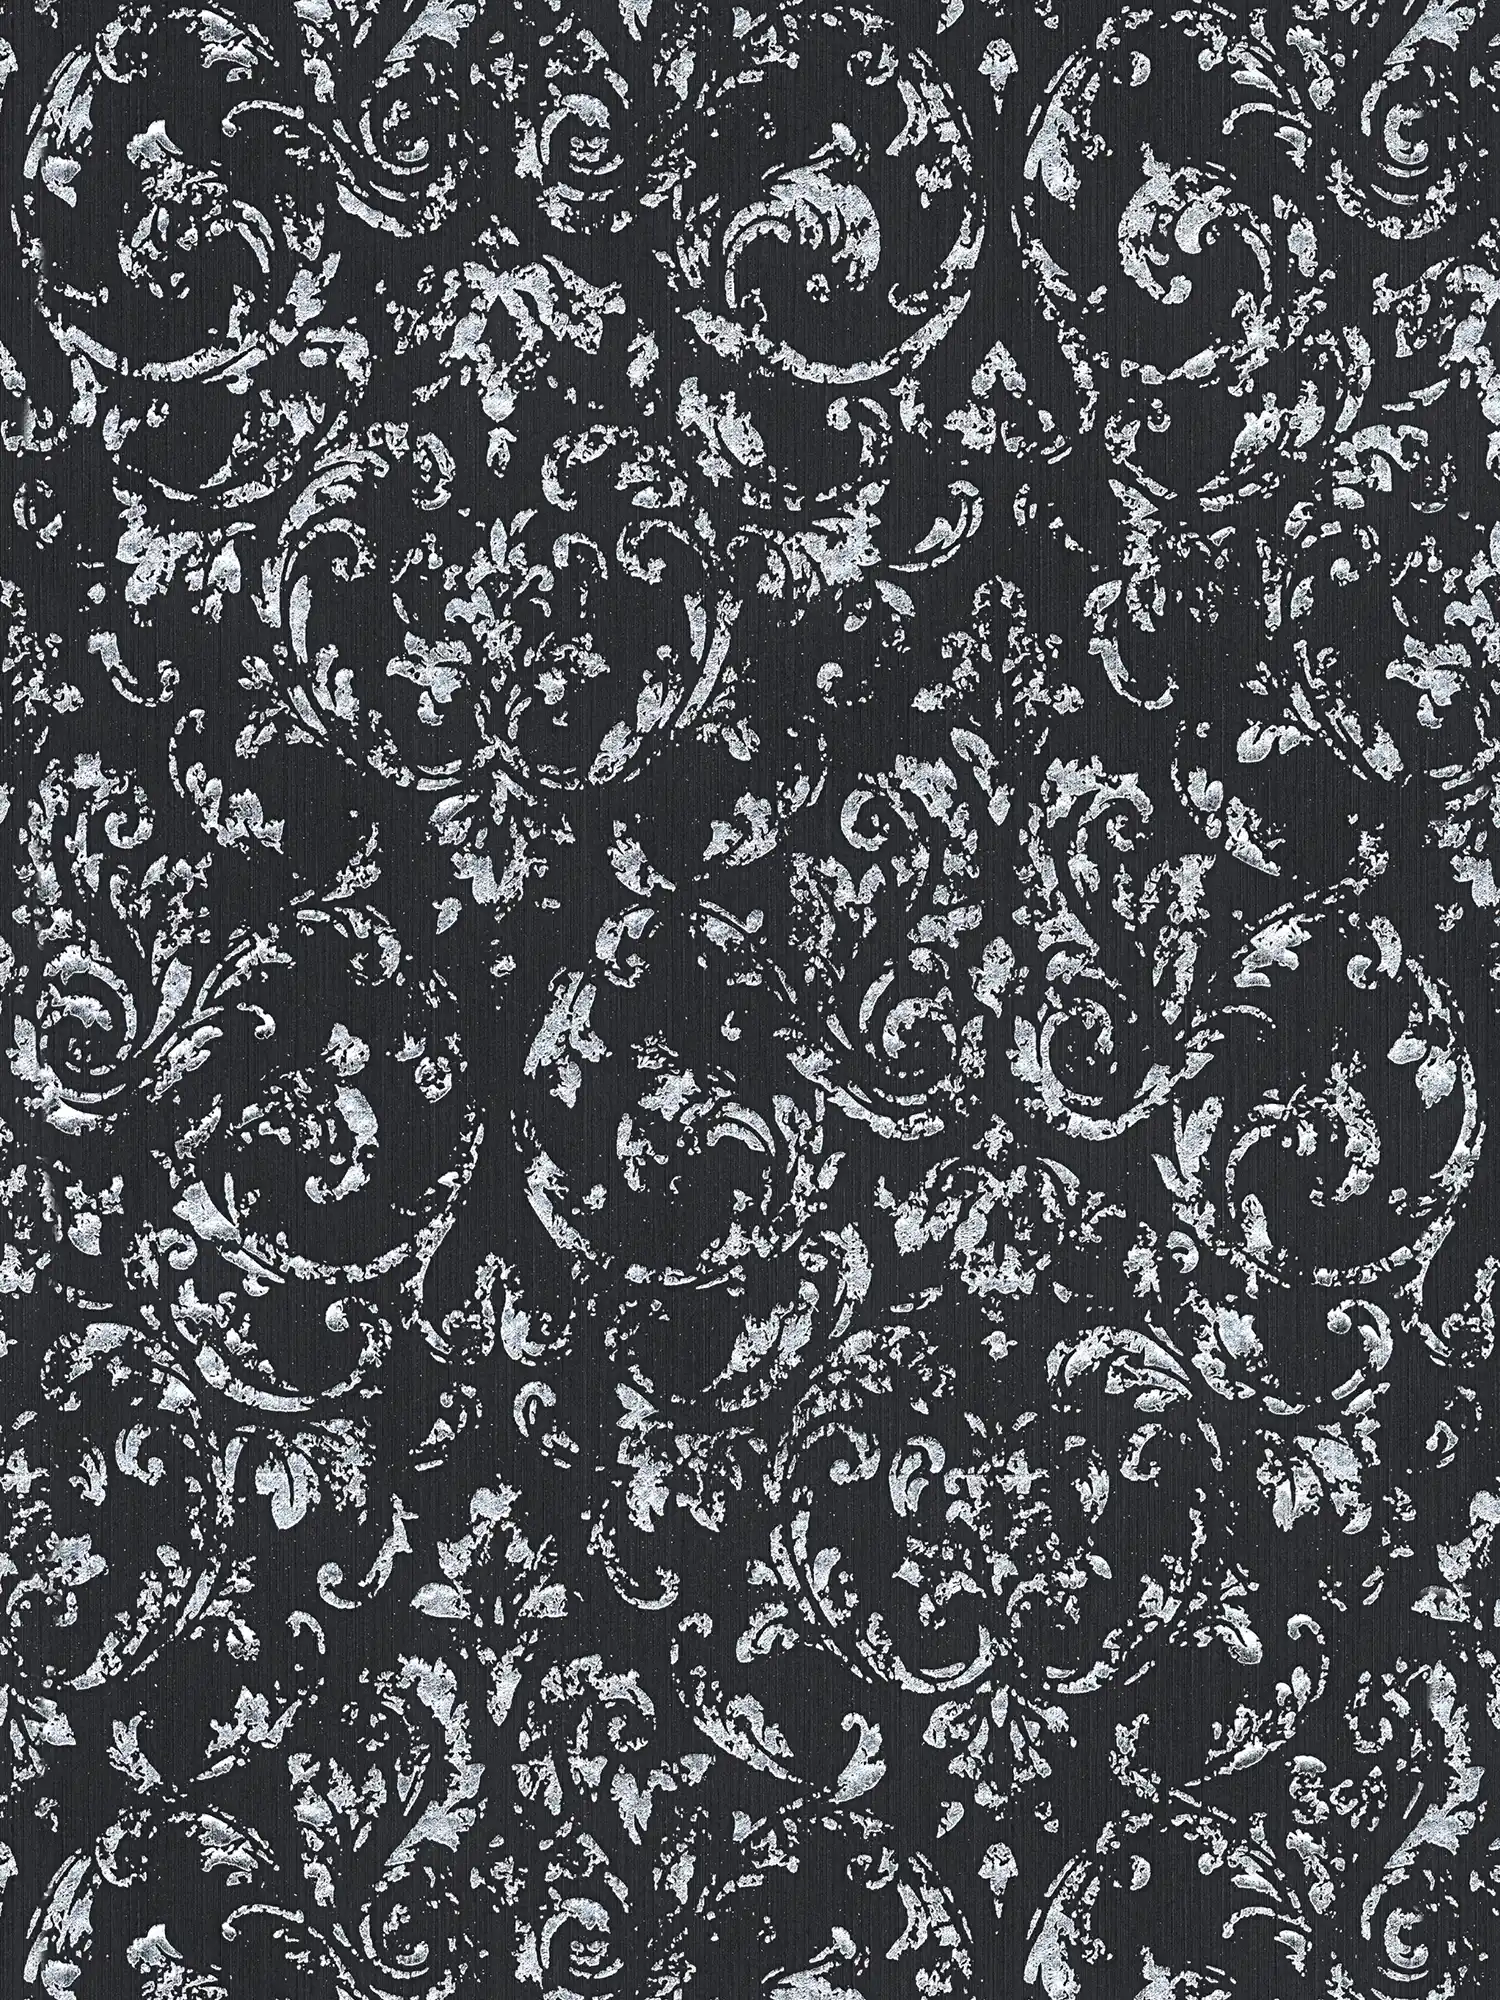 Wallpaper with silver ornaments in used look - black, silver
